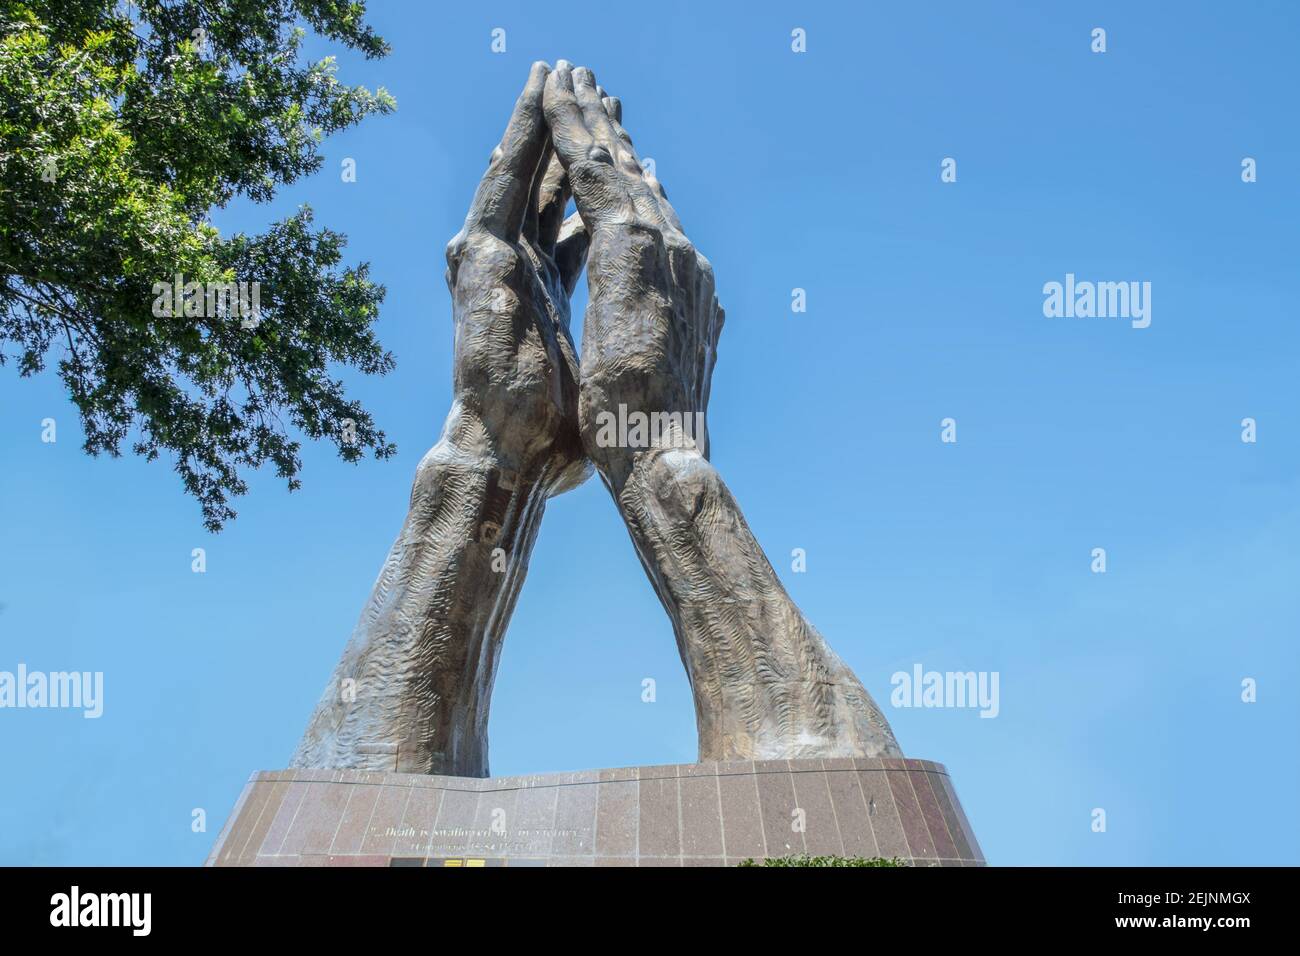 06-11-2020 Tulsa USA - Giant Praying Hands statue at Oral Roberts University - Reads Death is swallowed up in Victory - Against blue sky with tree Stock Photo